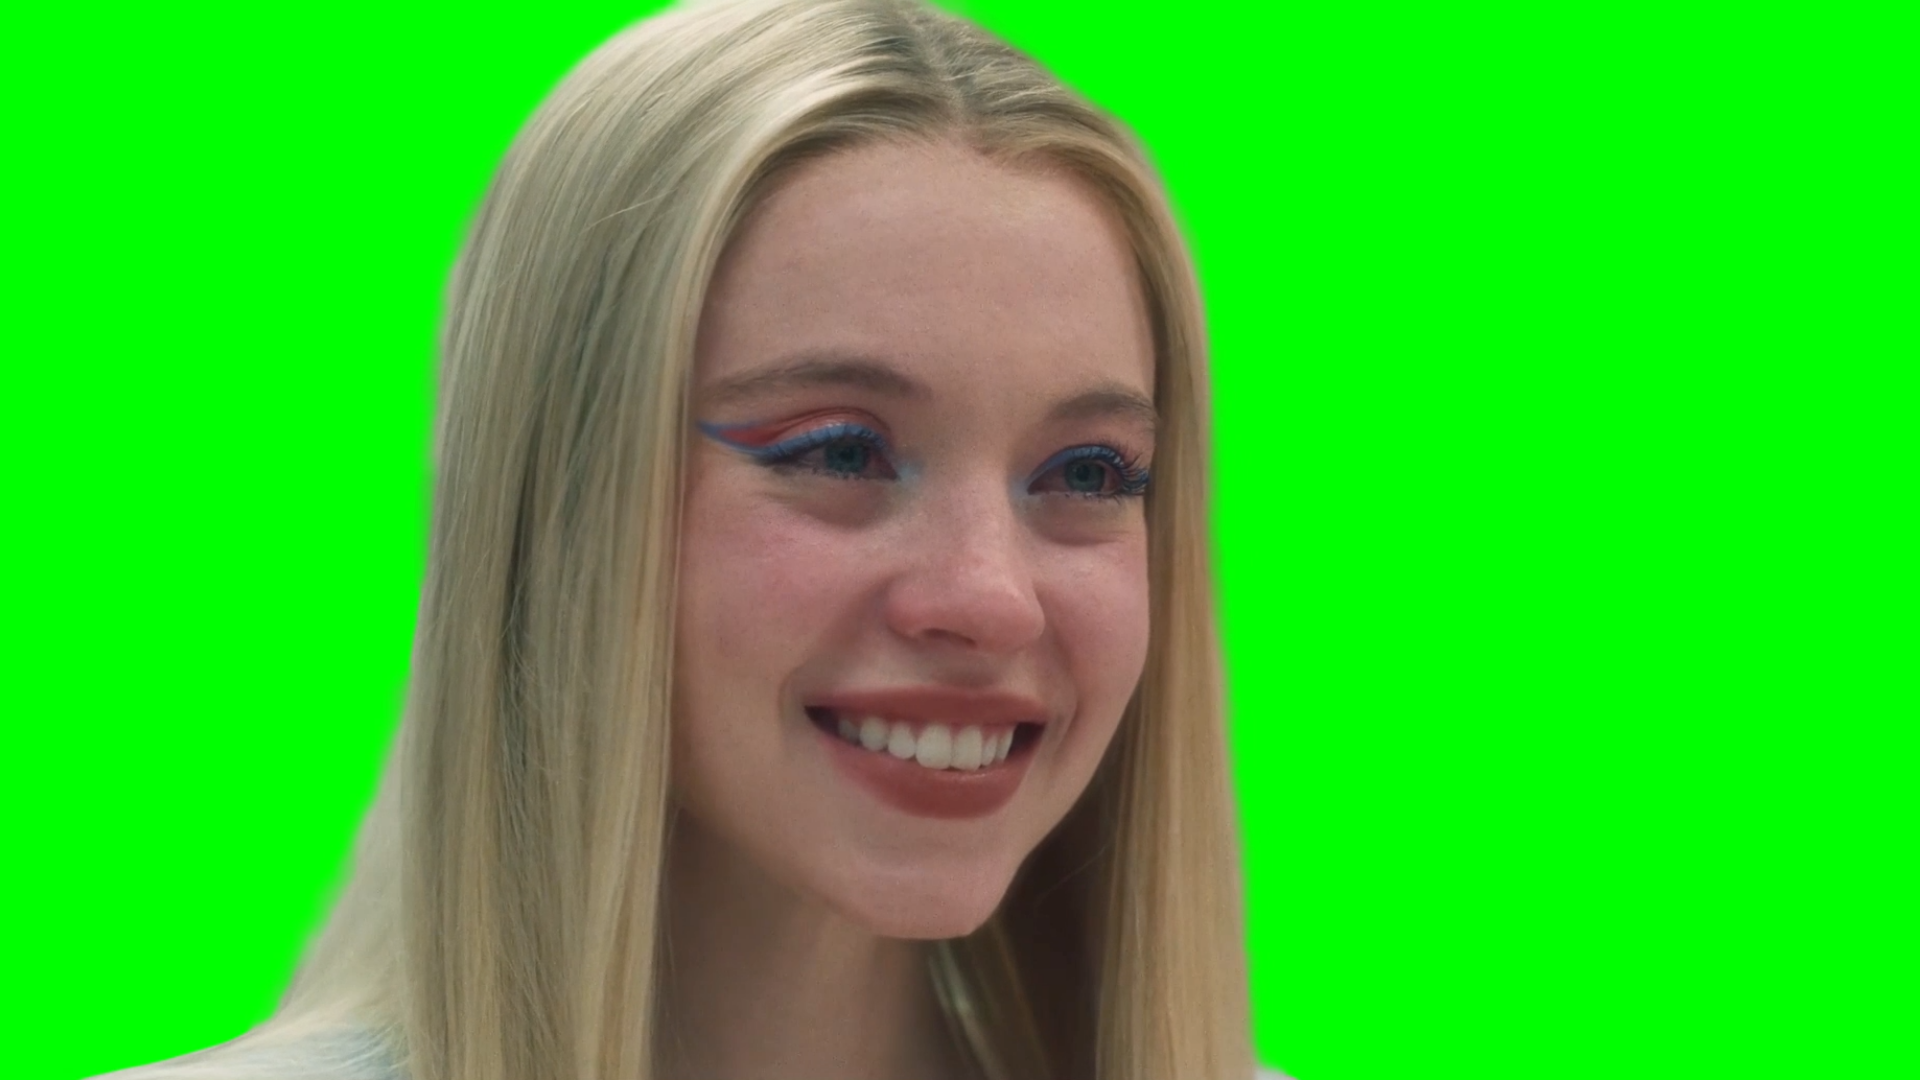 Sydney Sweeney crying and smiling - Euphoria (Green Screen)